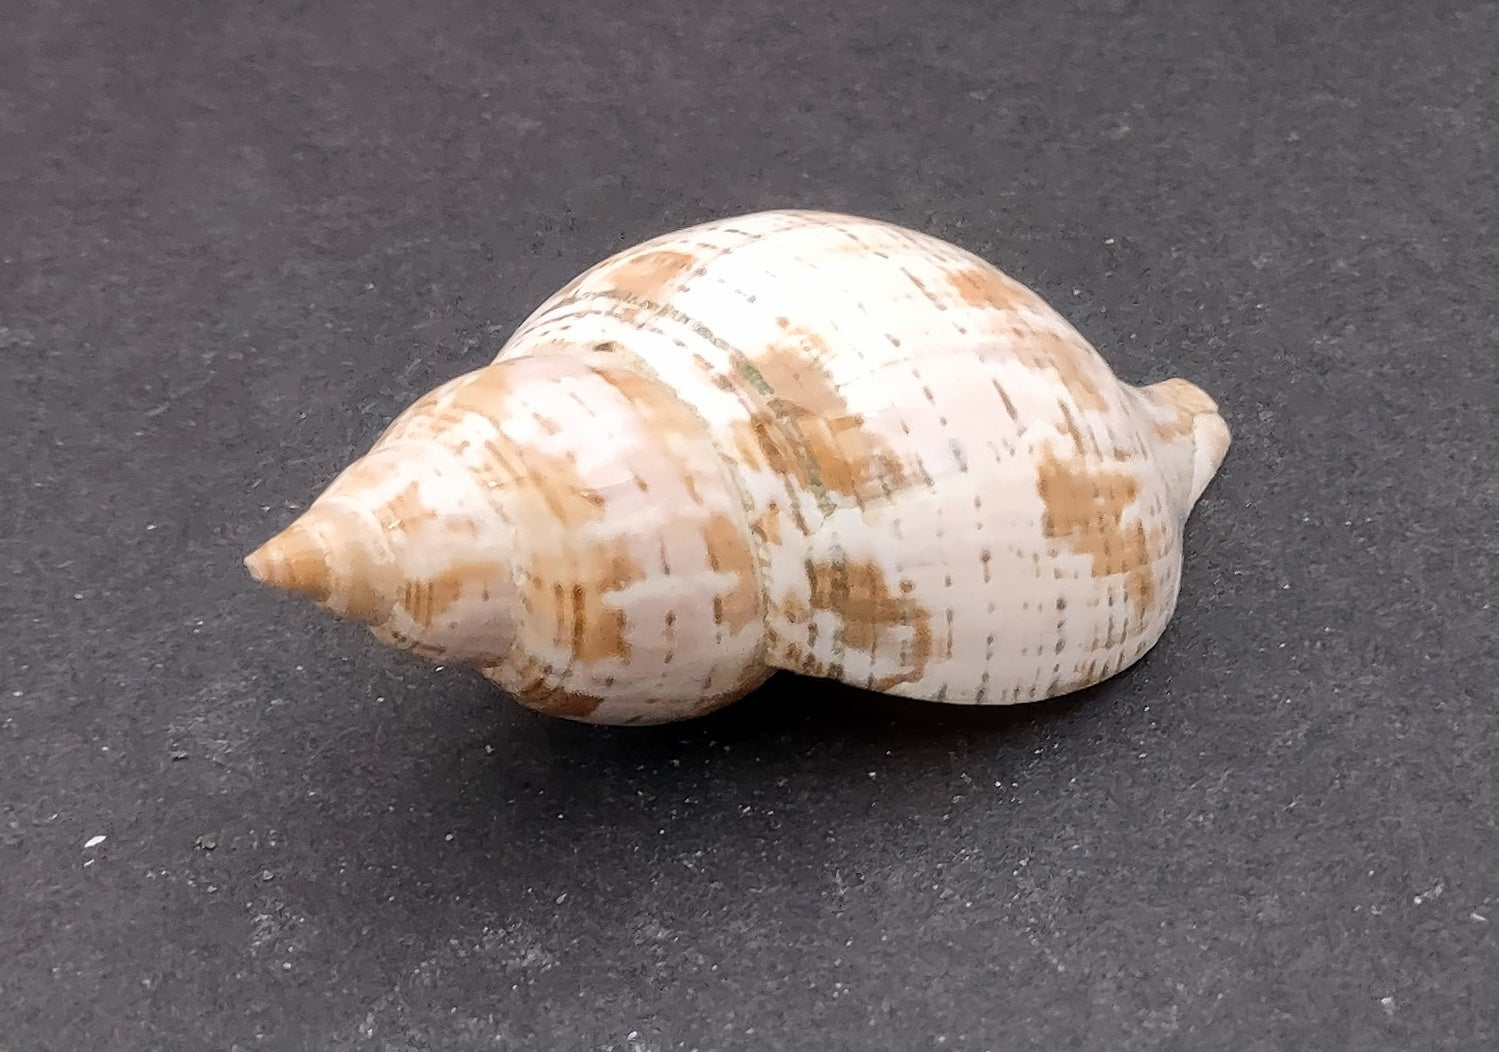 True Tulip Seashell - Fasciolaria Tulipa - (1 shell approx. 3-4 inches). Multiple shells laying to show the different angles of the coloring, shape, and patterns. Copyright 2022 SeaShellSupply.com.